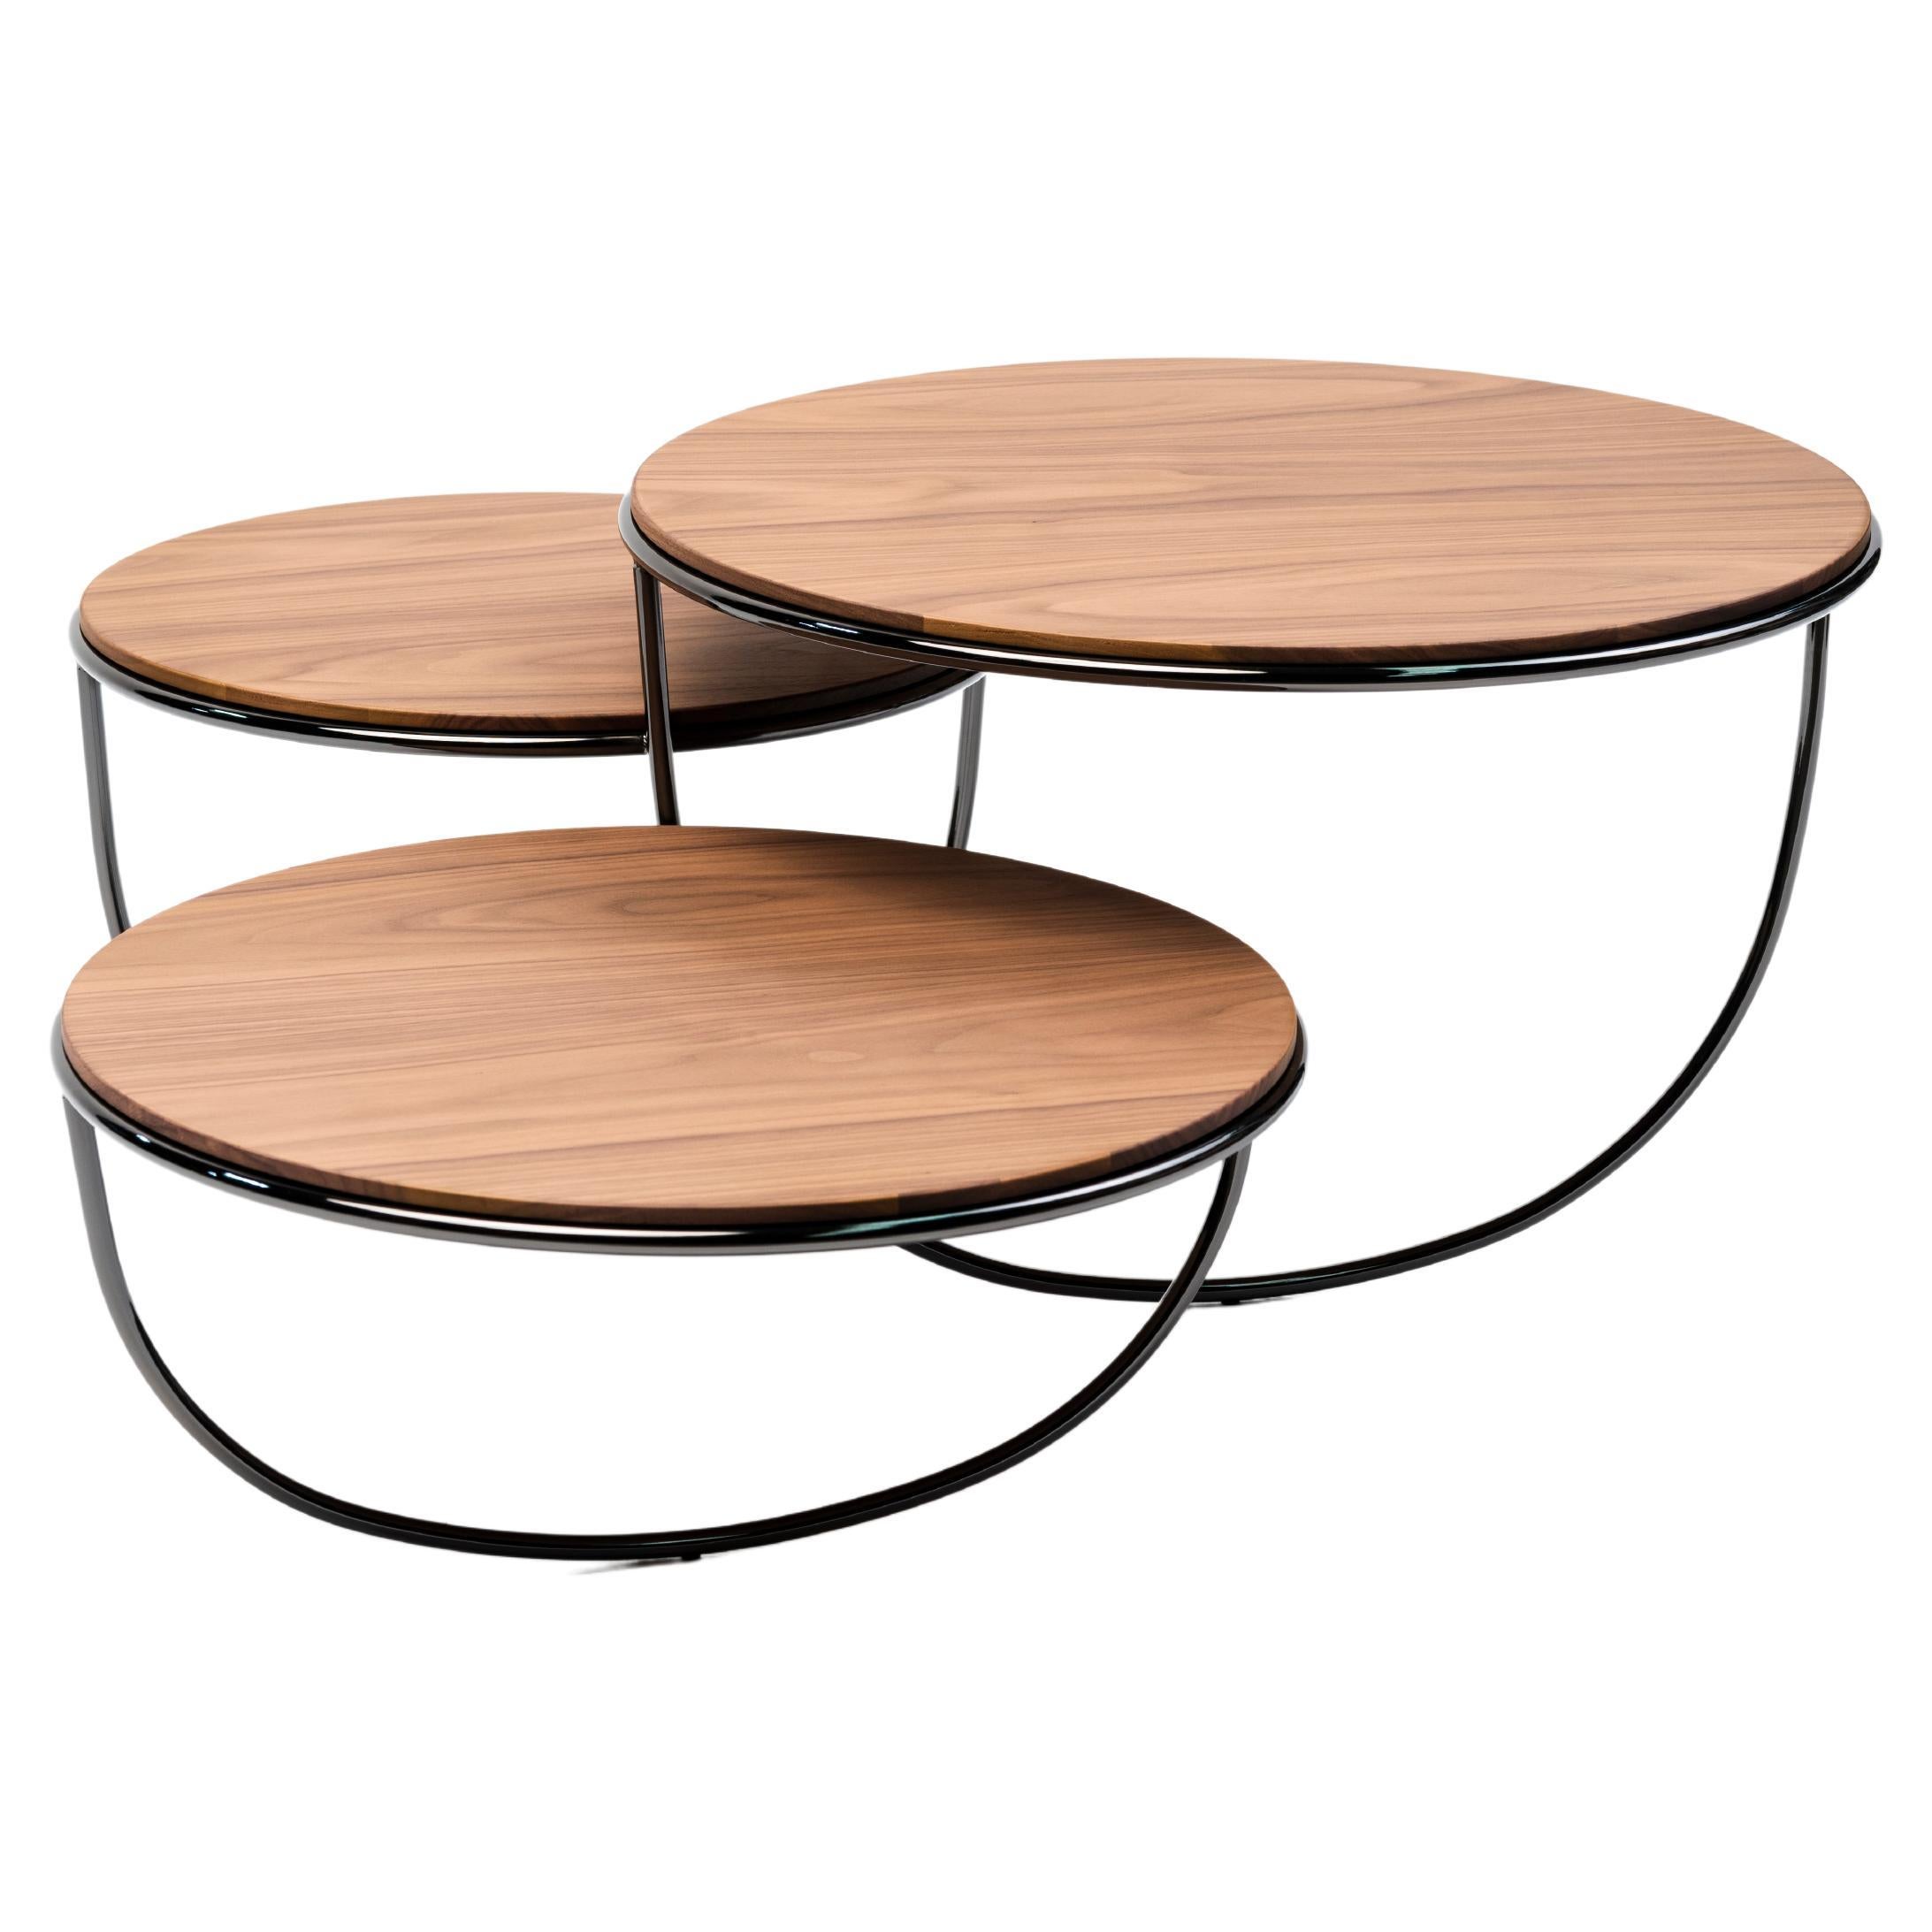 At first sight, Trio is a side table that consists of three transparent bowls overlapping one another.
The opening of each bowl is covered with either a glass, metal or wood top. The shape of the bowl is suggested by a single curved line —